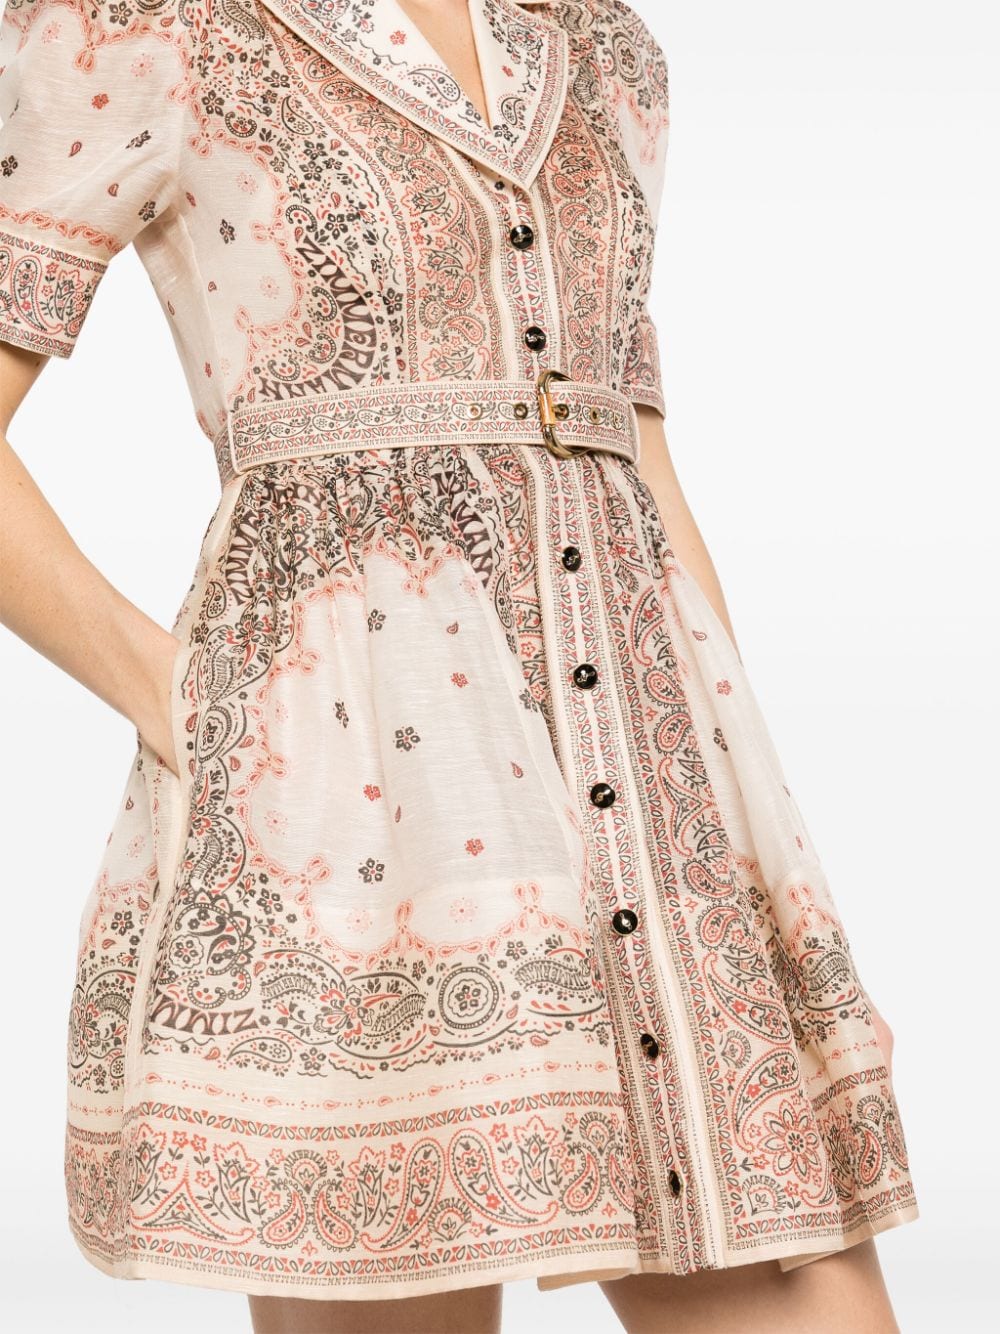 Dress with patterns